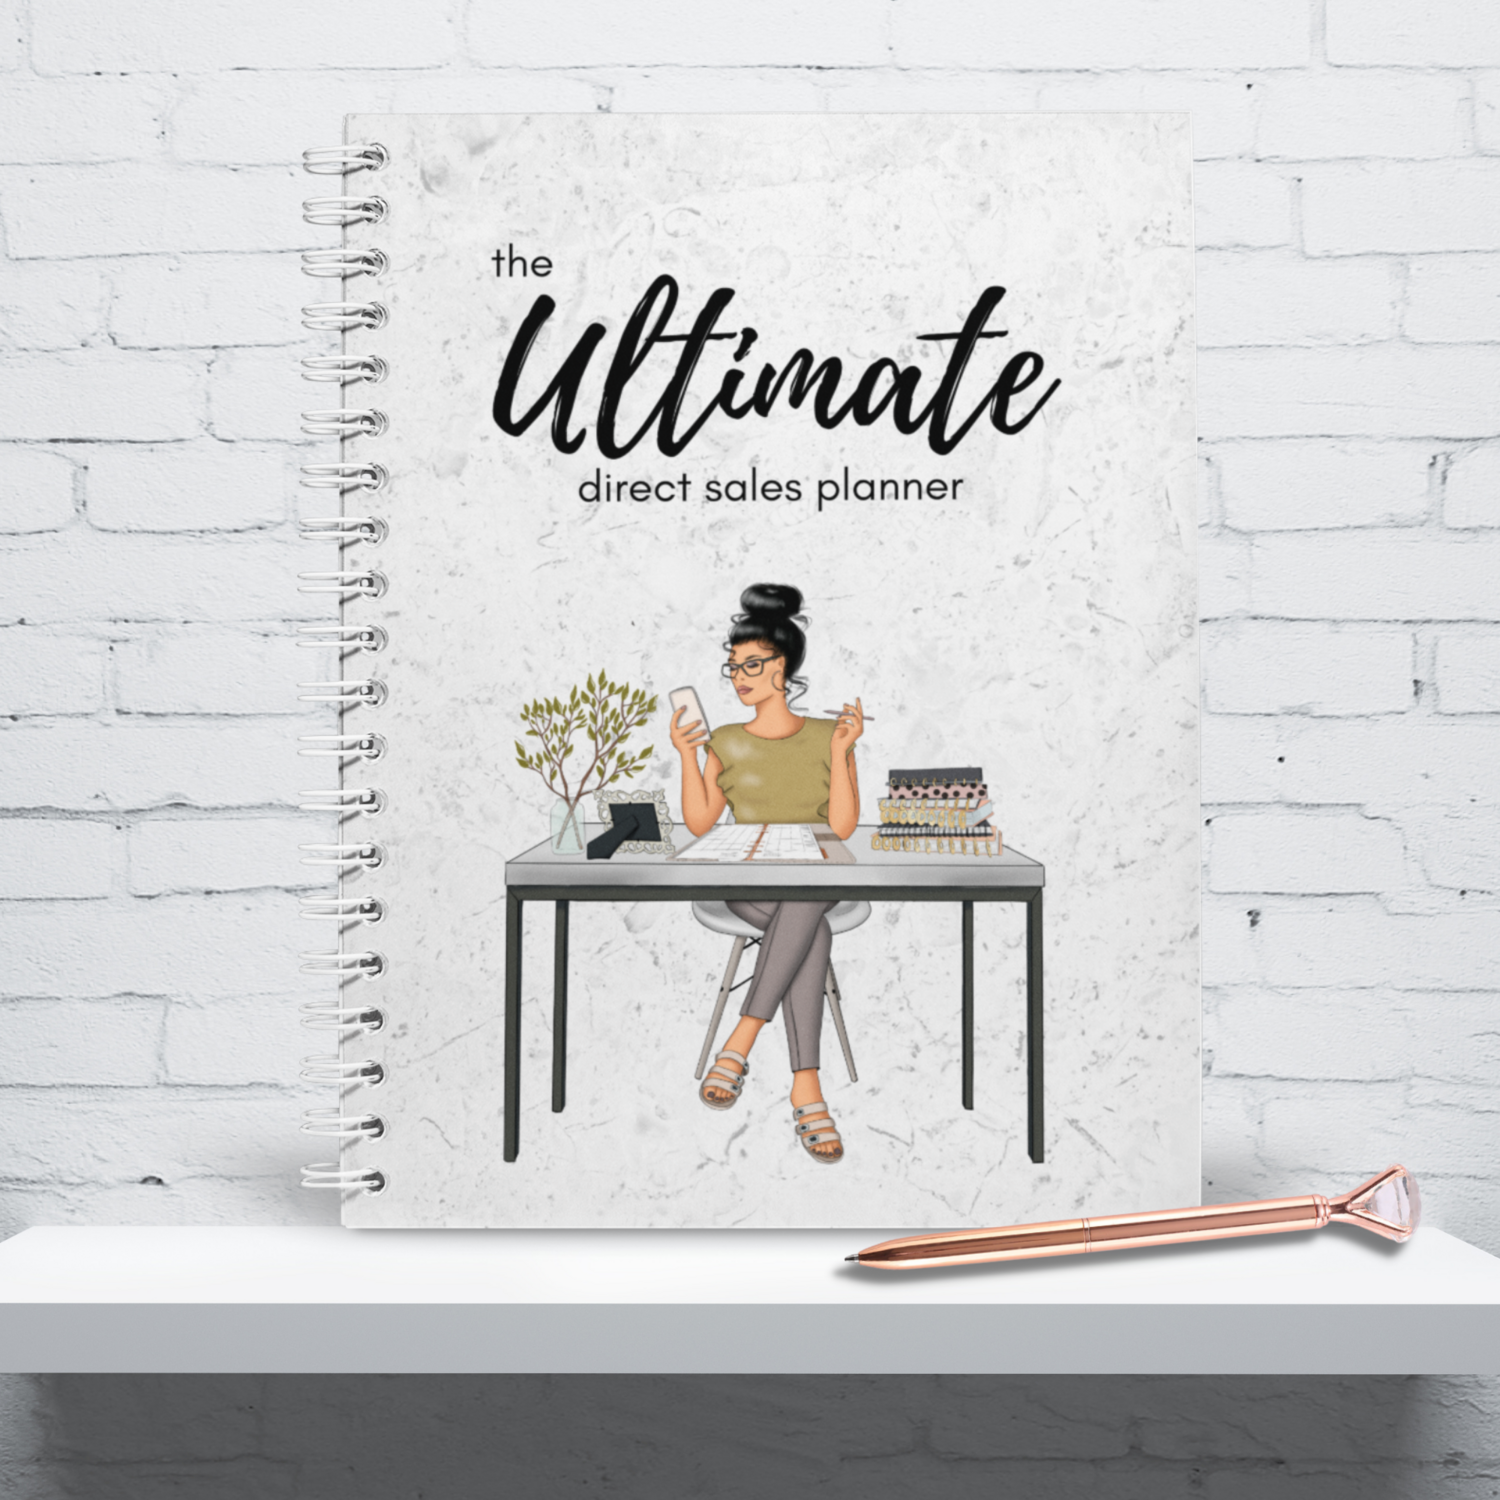 The Ultimate Direct Sales Planner - FREE ROSE GOLD CRYSTAL TOP PEN & MAGNETIC BOOKMARK